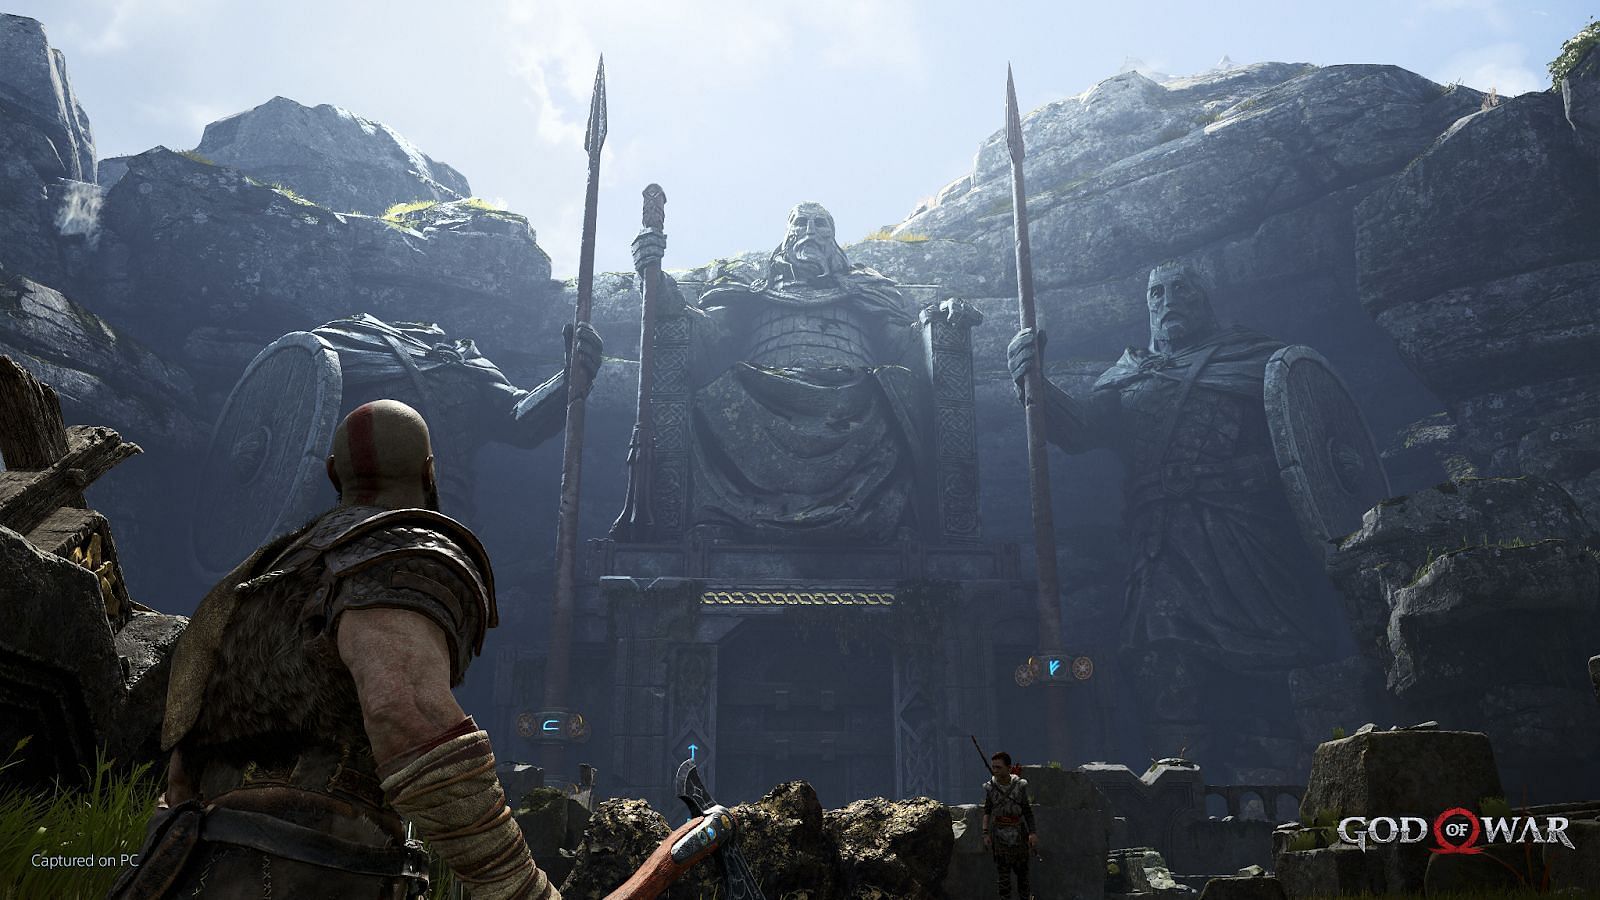 God of War PC is launching in January 2022 (Image via PlayStation)